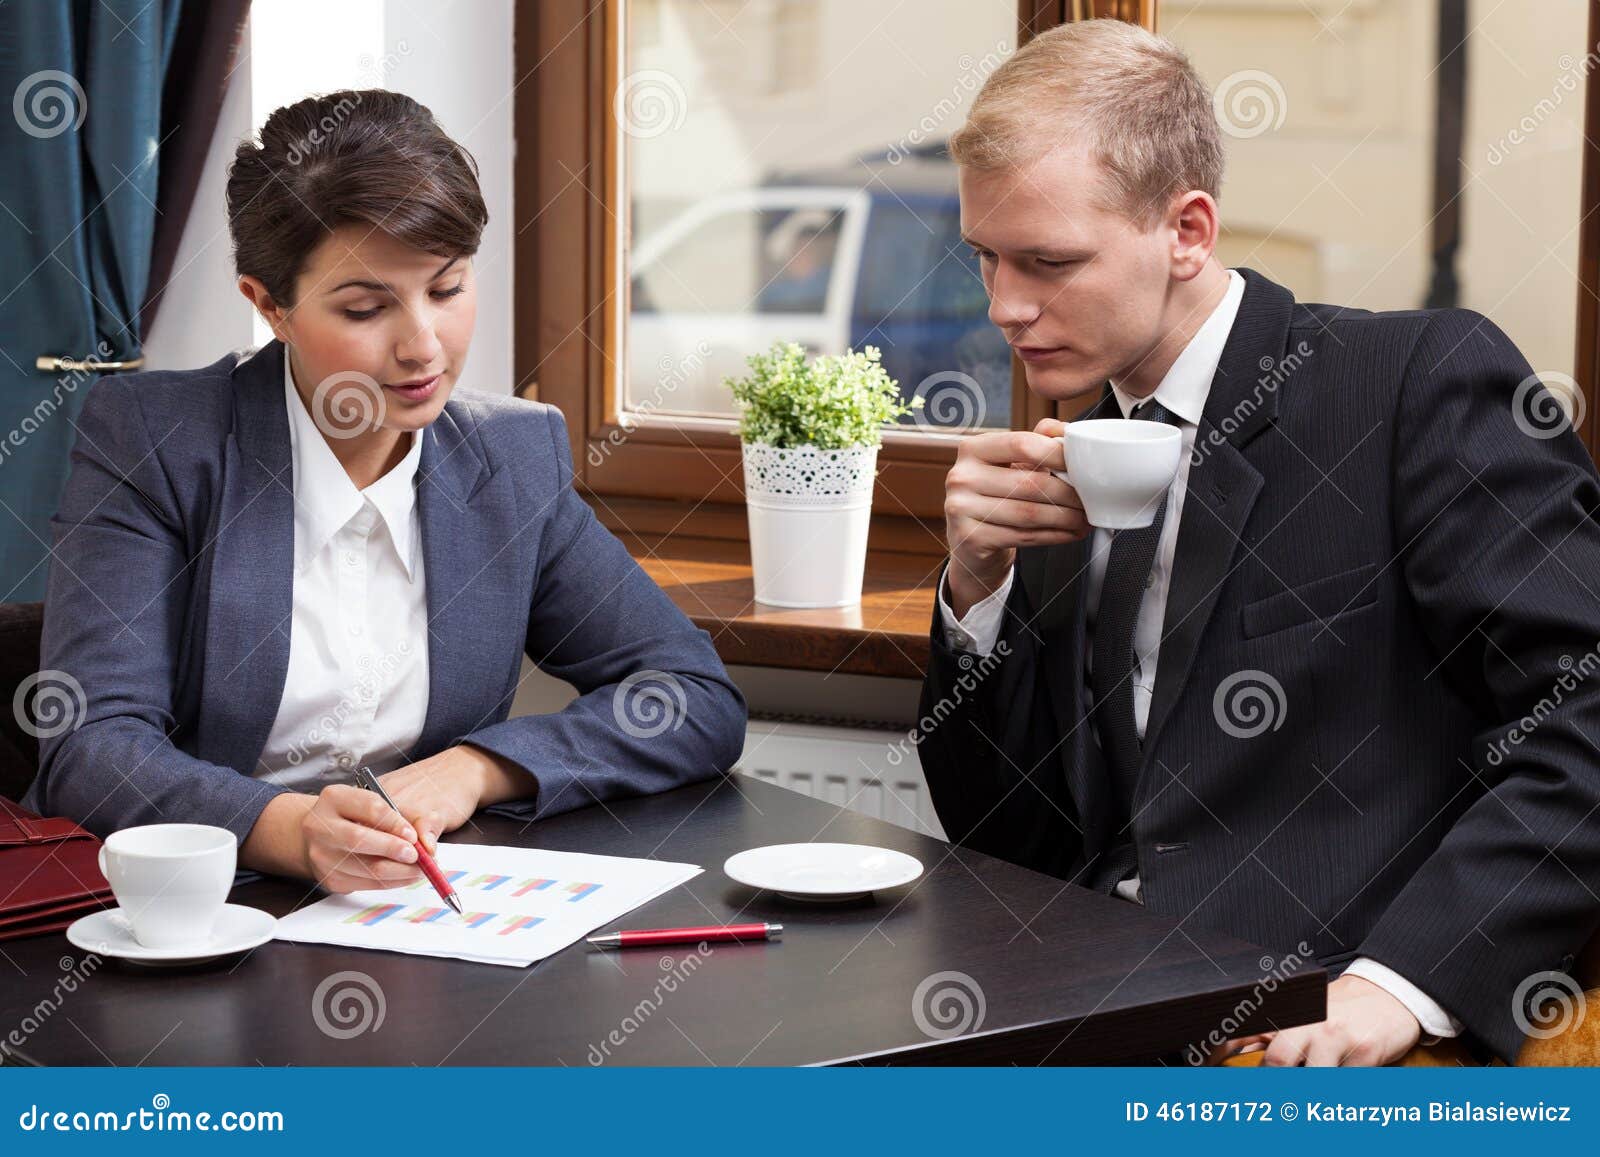 business meeting in coffeehouse